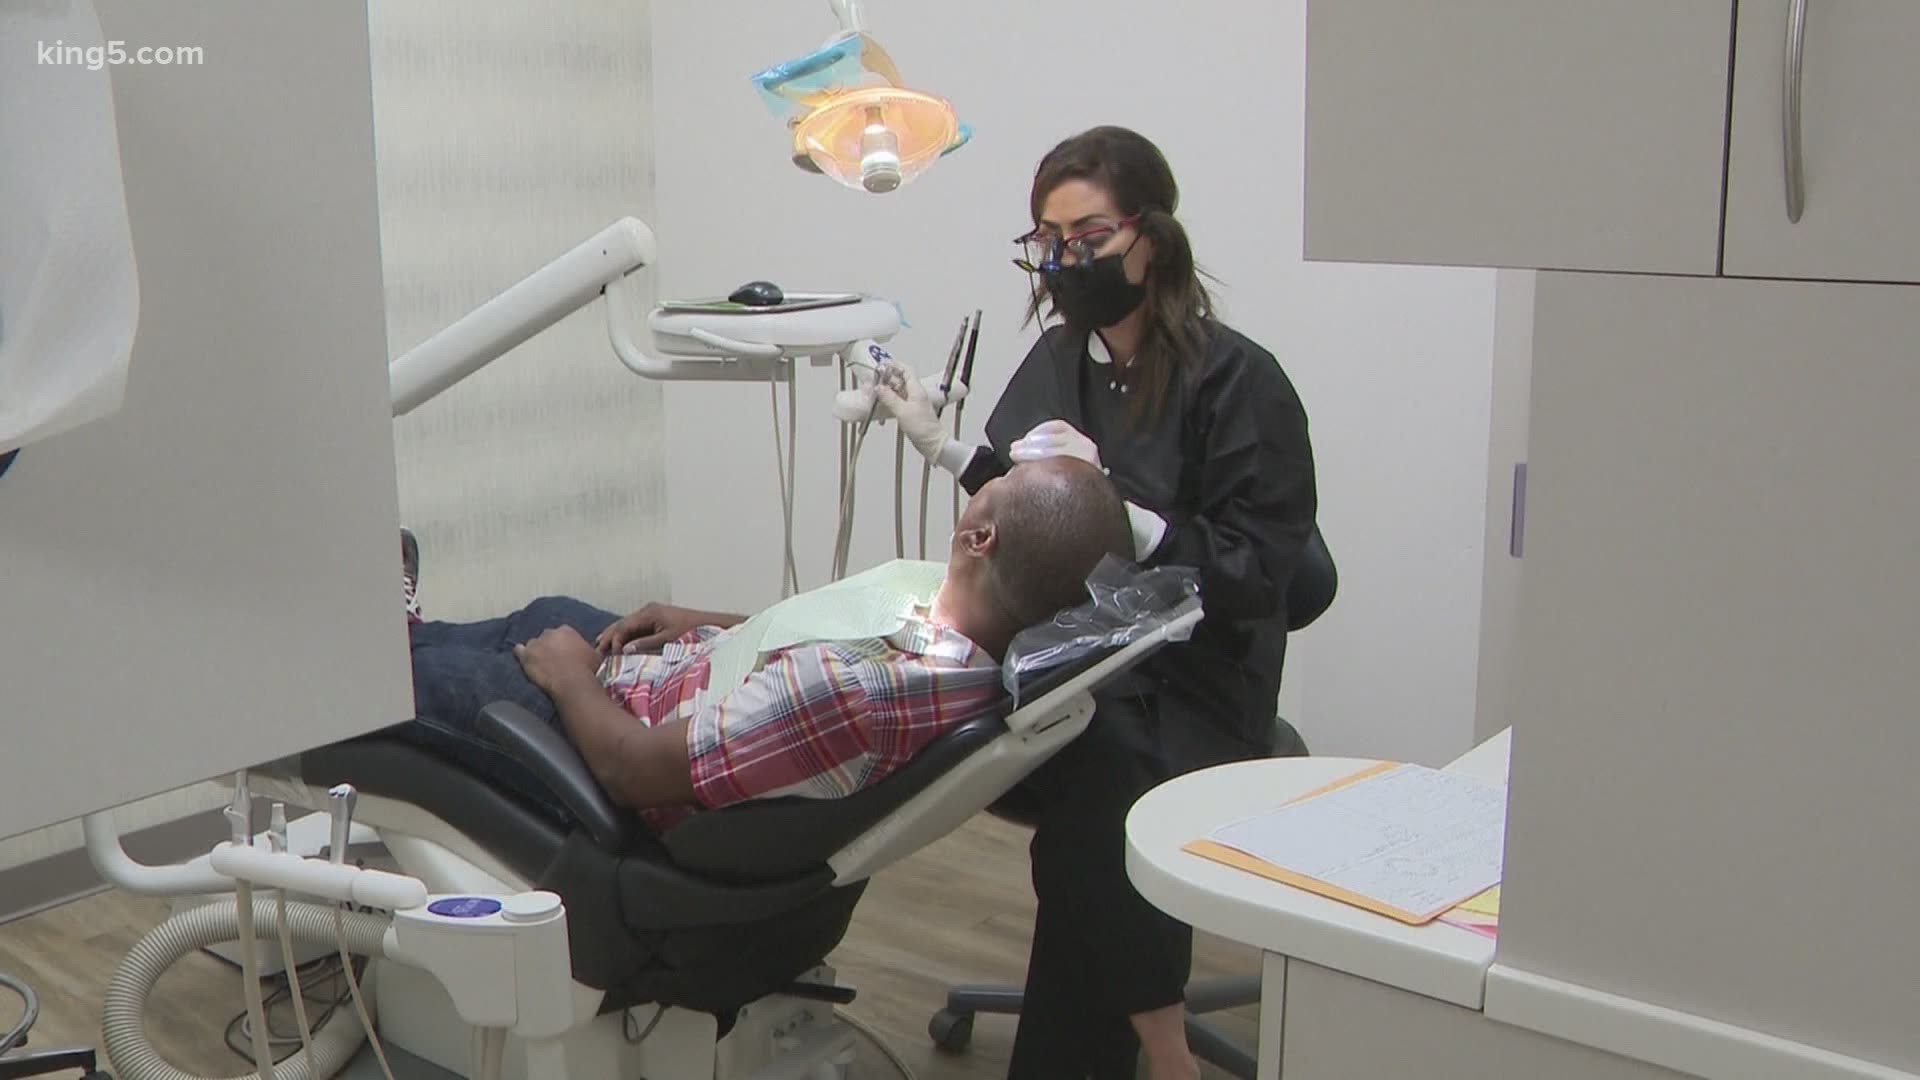 Some dental offices have been given the green light to reopen, but some staff are concerned about the lack of personal protective equipment amid the pandemic.